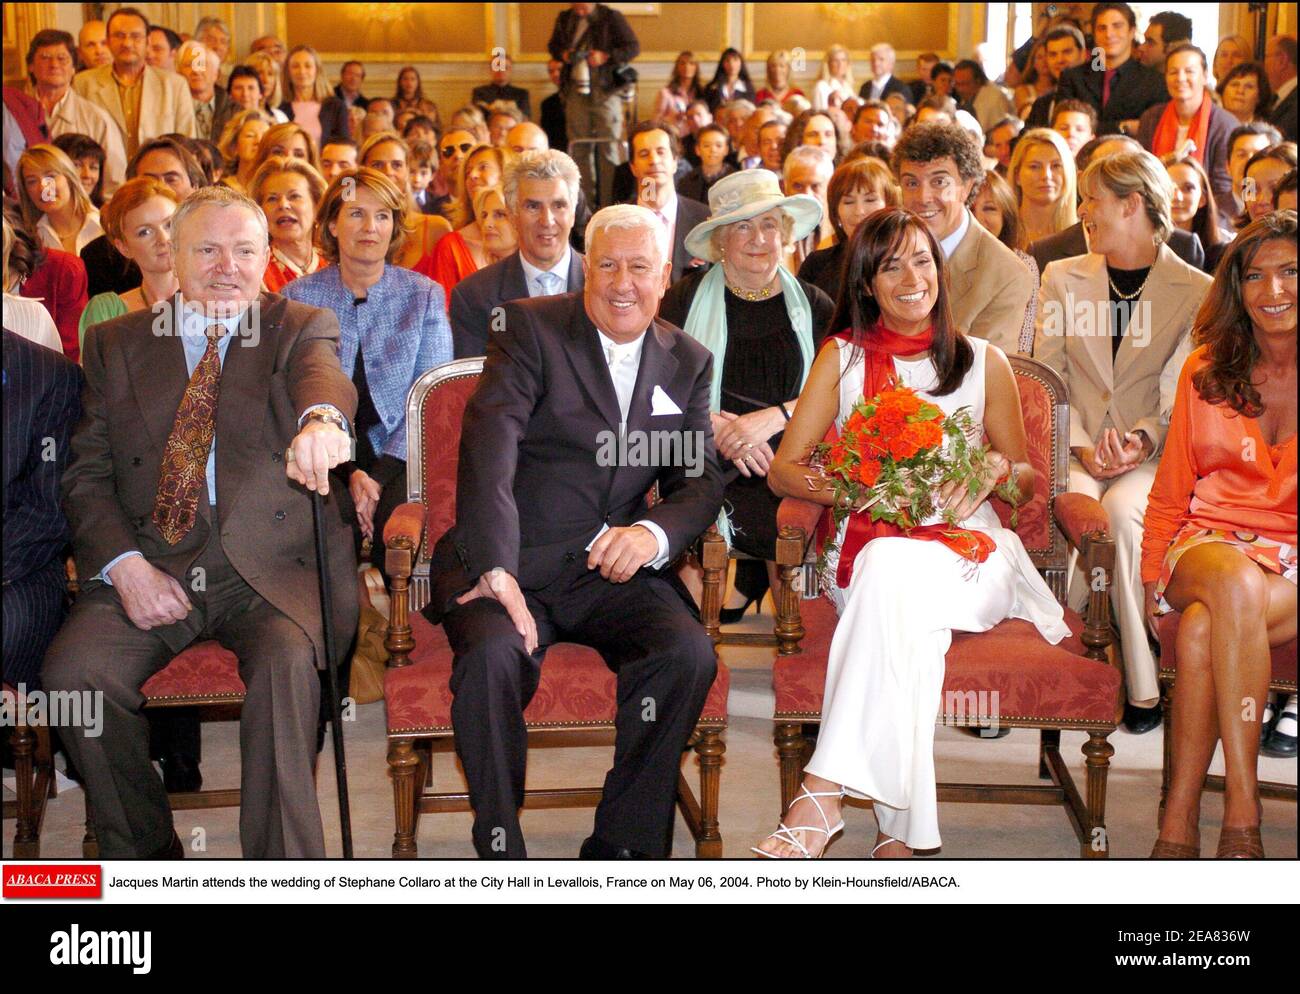 Jacques Martin and his wife attend the wedding of Stephane Collaro at the City Hall in Levallois, France on May 06, 2004. Photo by Klein-Hounsfield/ABACA. Stock Photo